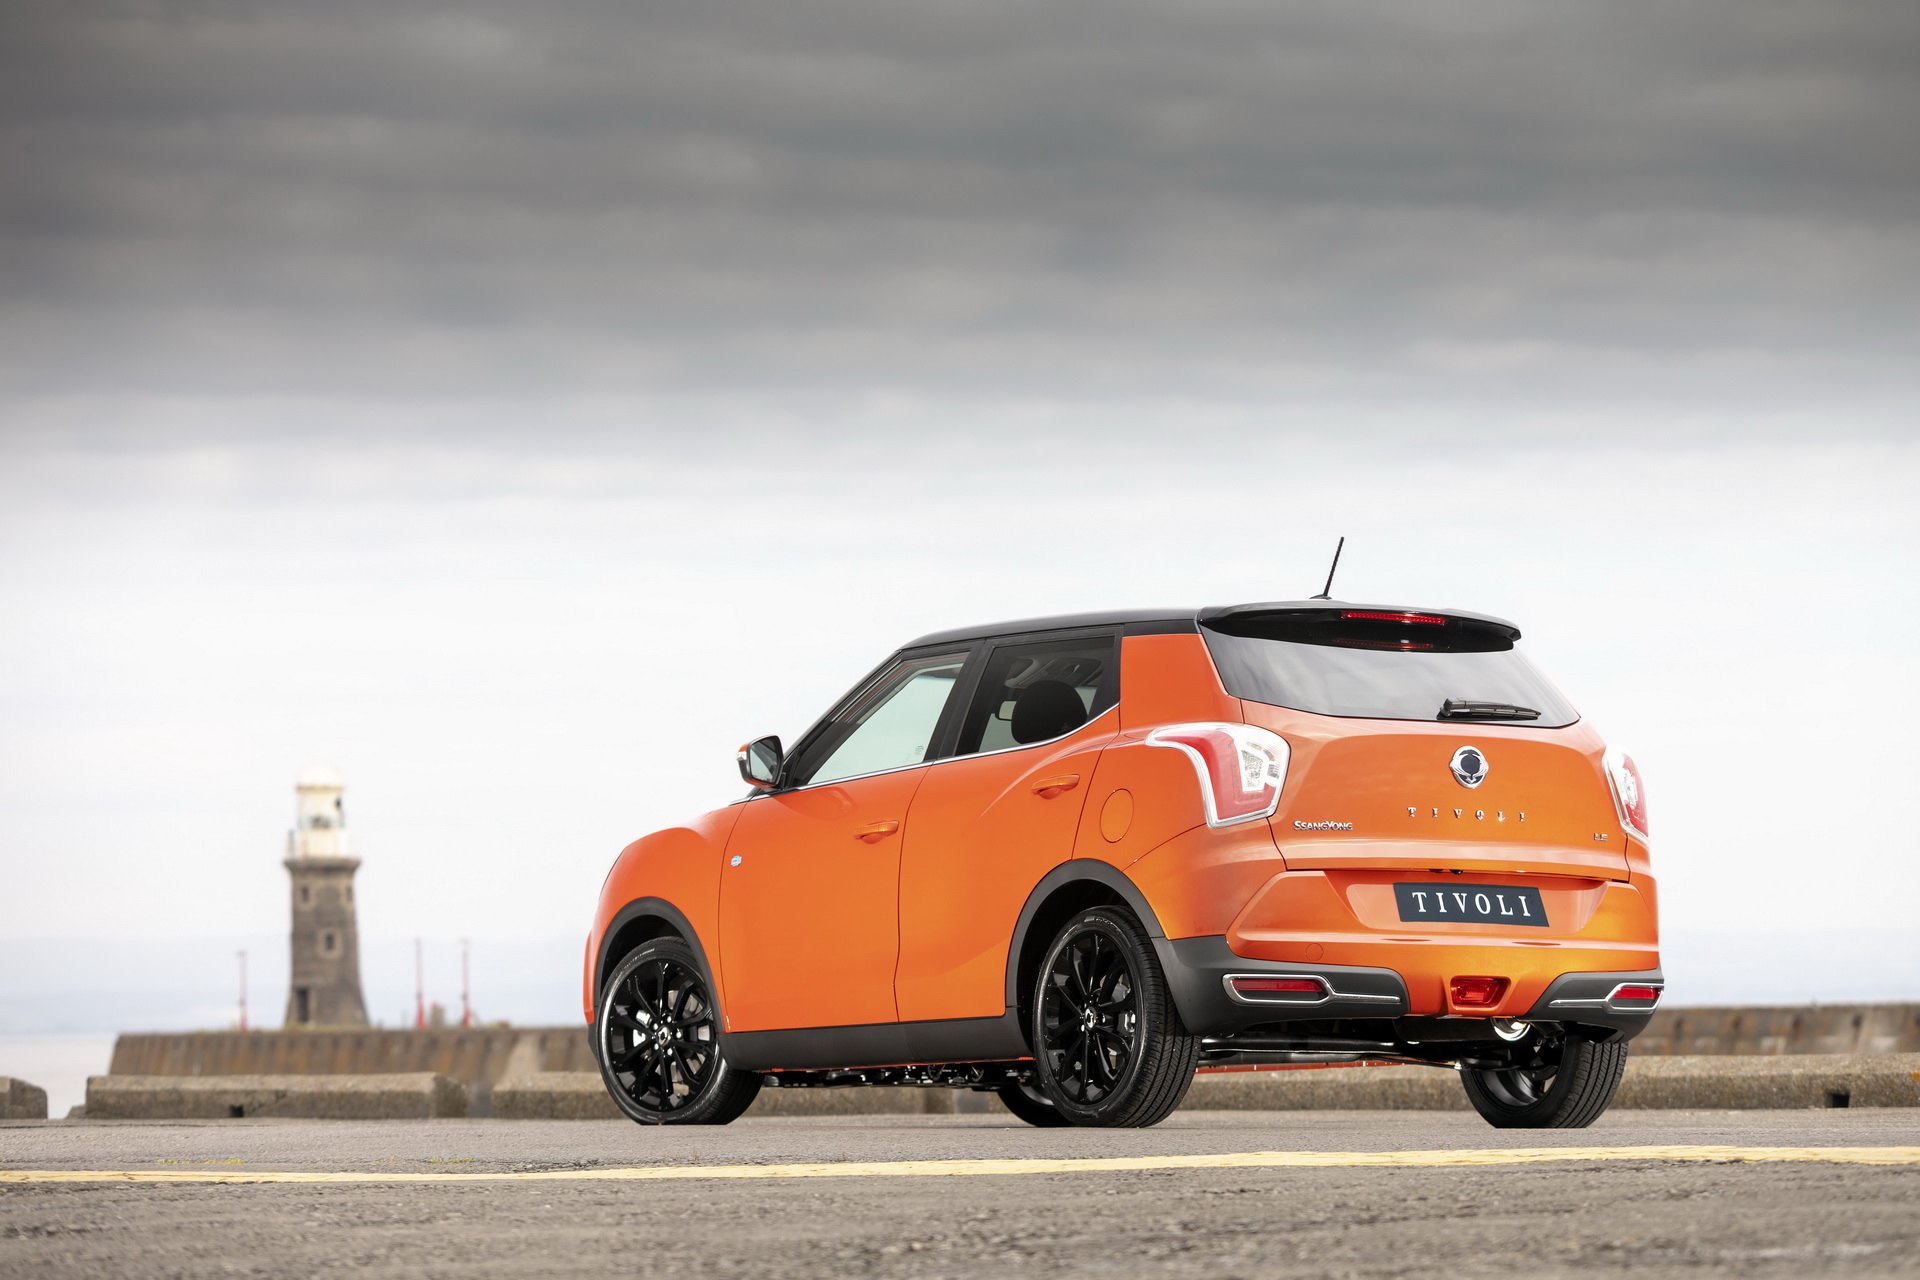 Special Edition SsangYong Tivoli LE Priced From £17,745 In UK | Carscoops